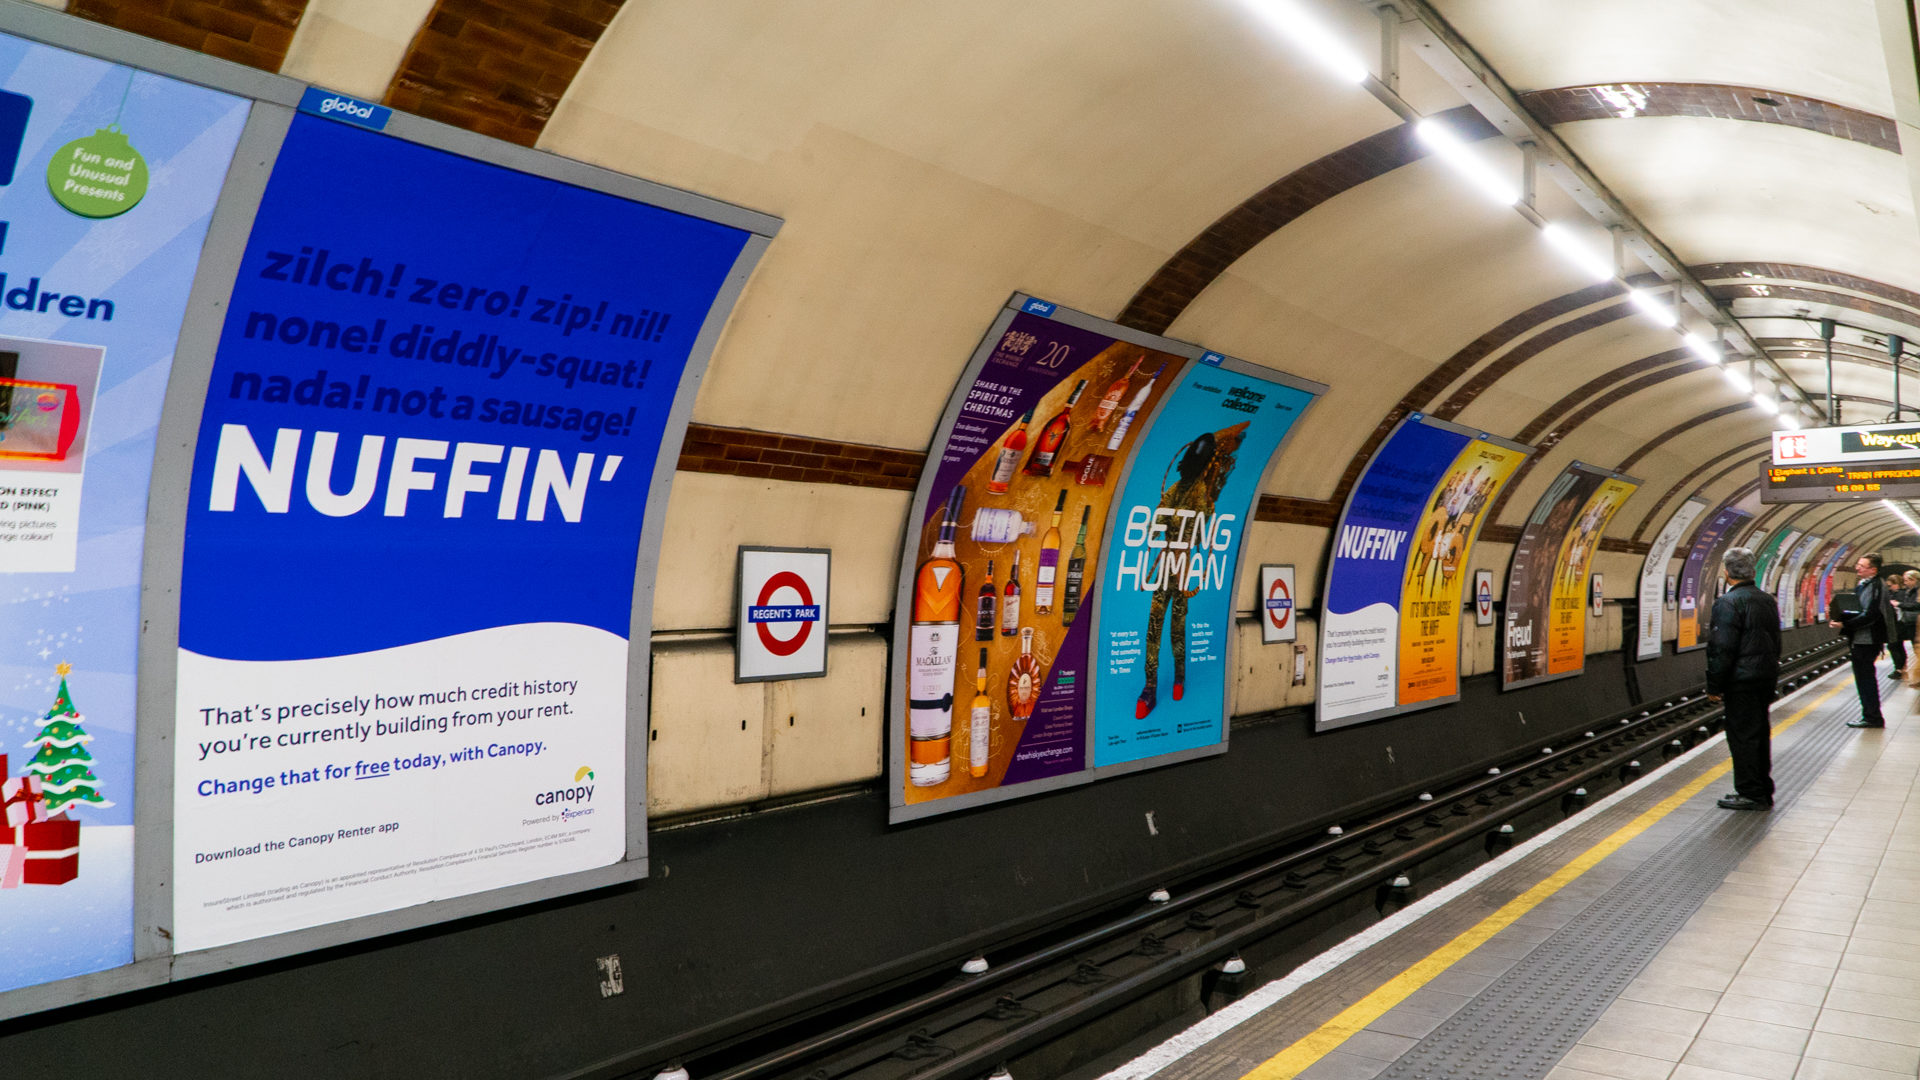 Canopy NUFFIN' advertising campaign tube station